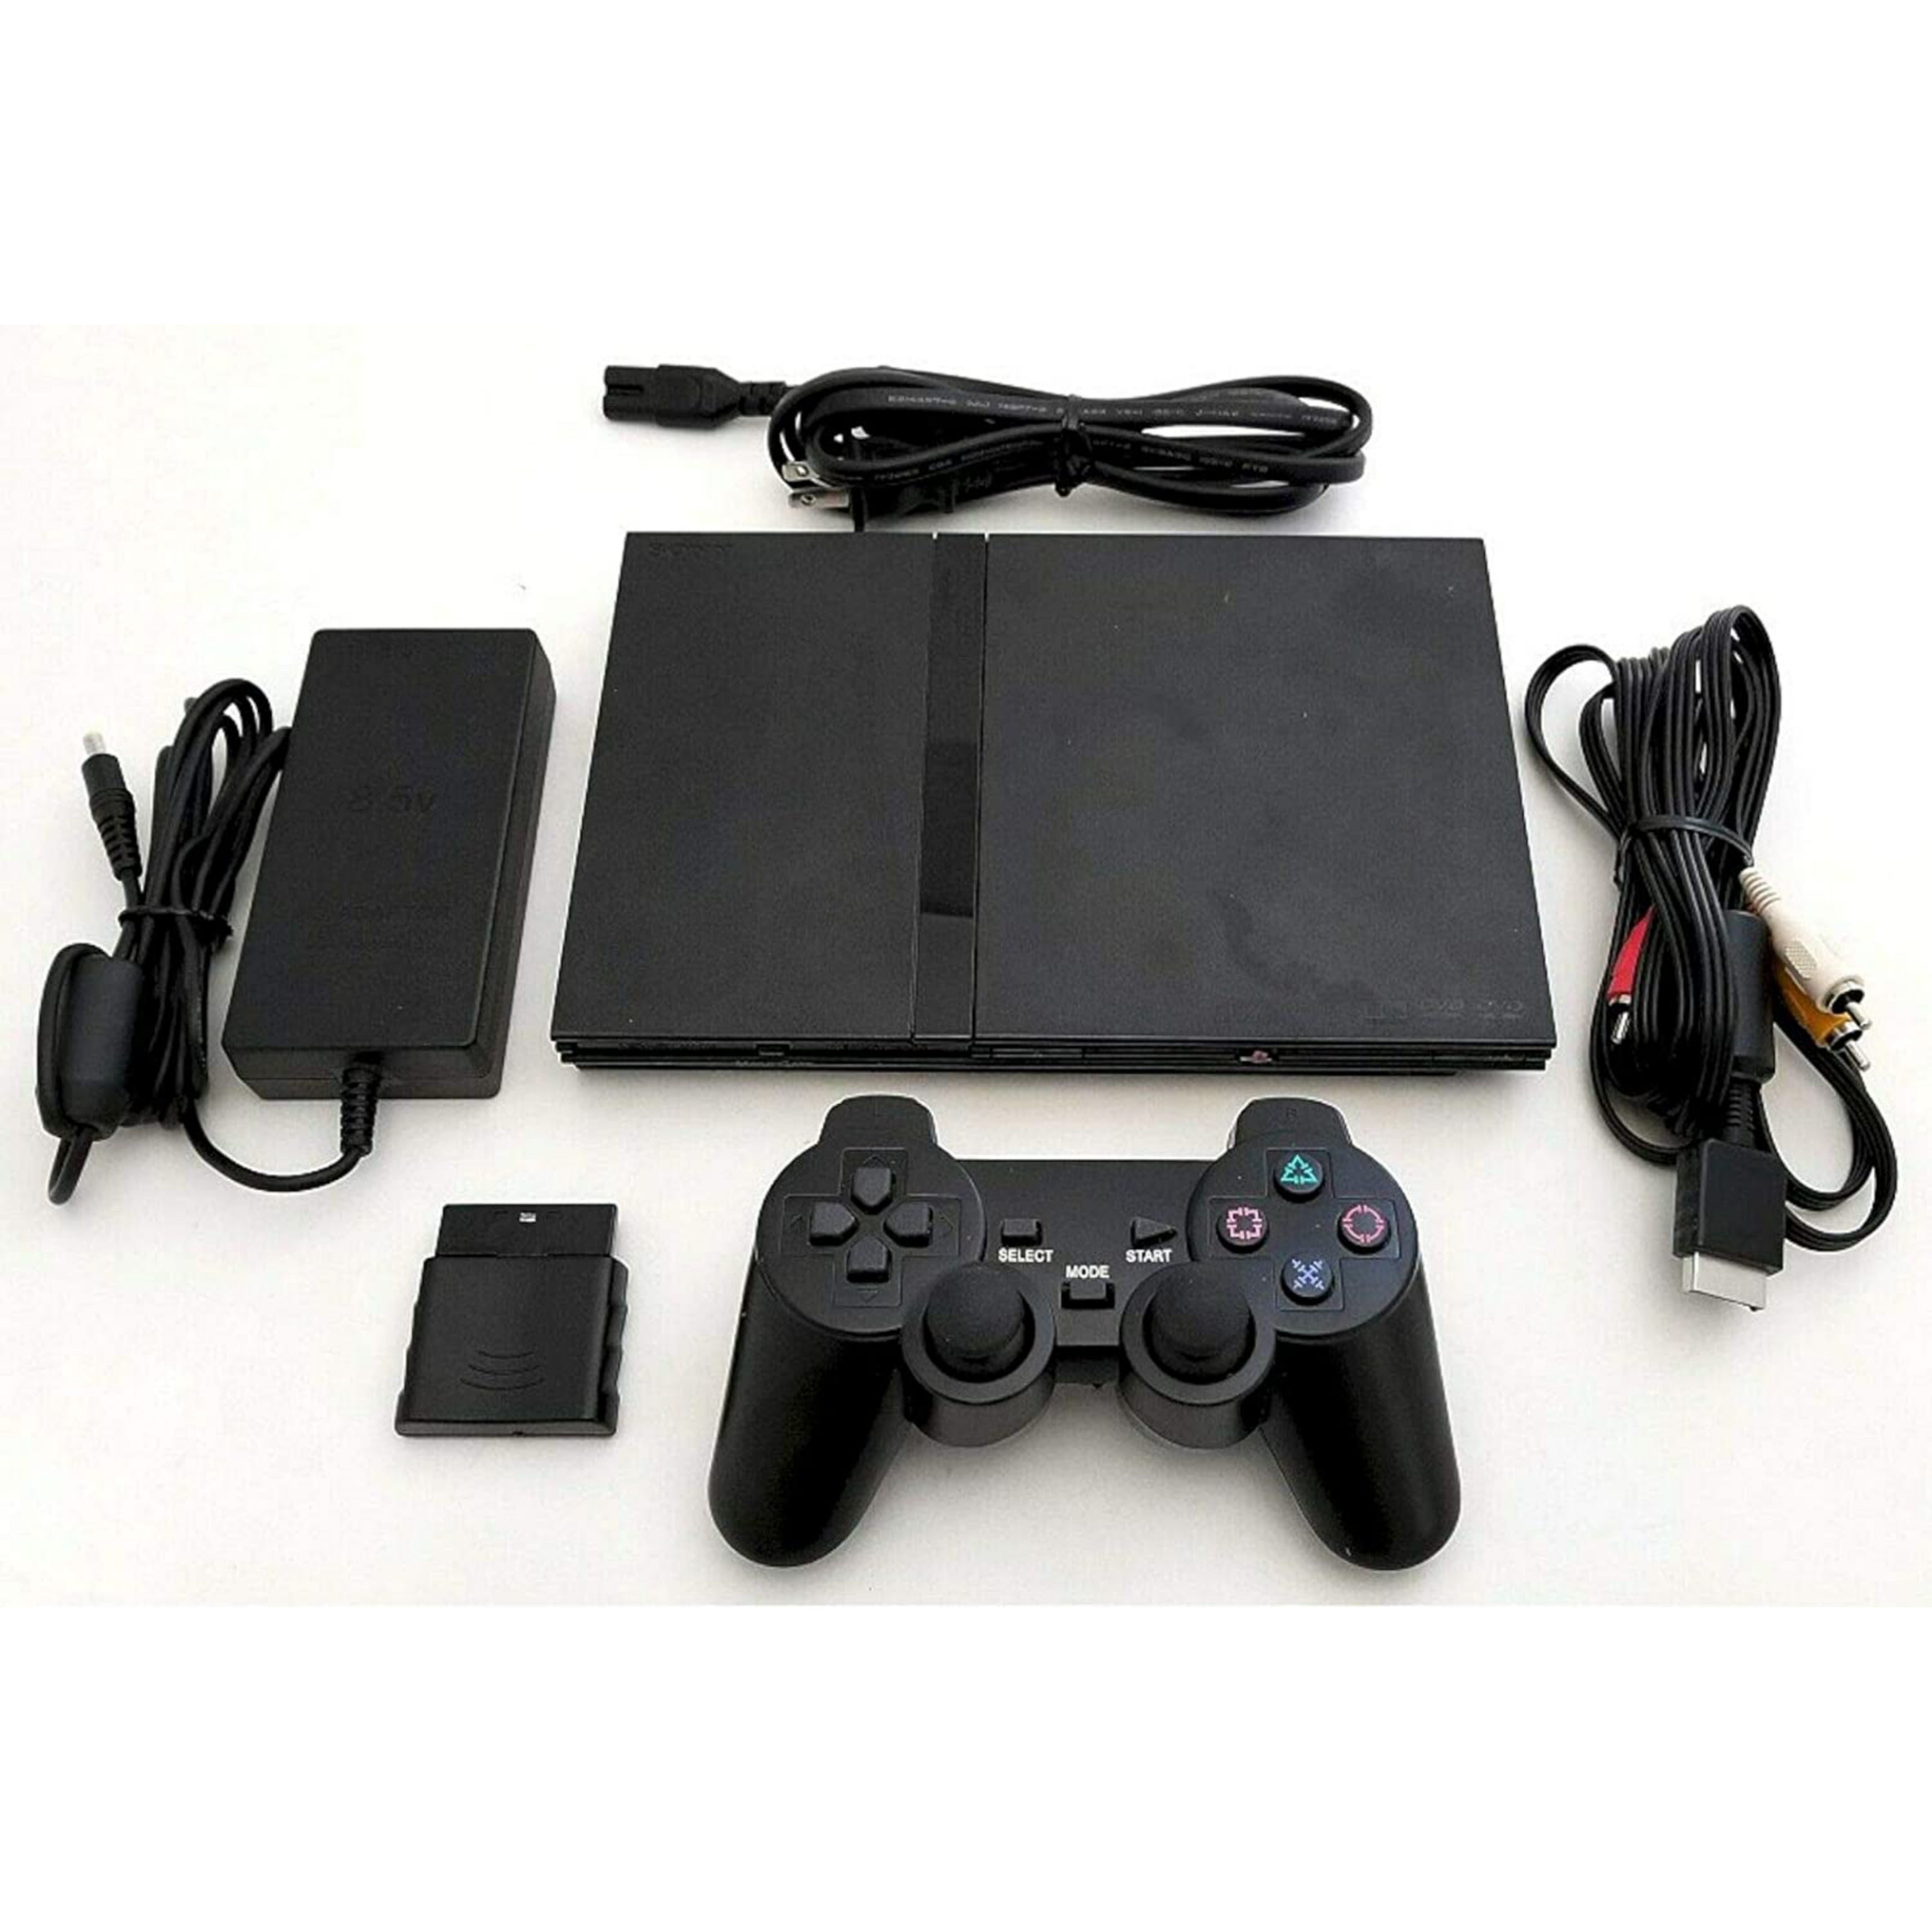 UK Used (Sony 2) Slim Game Console Complete Set W IFESOLOX